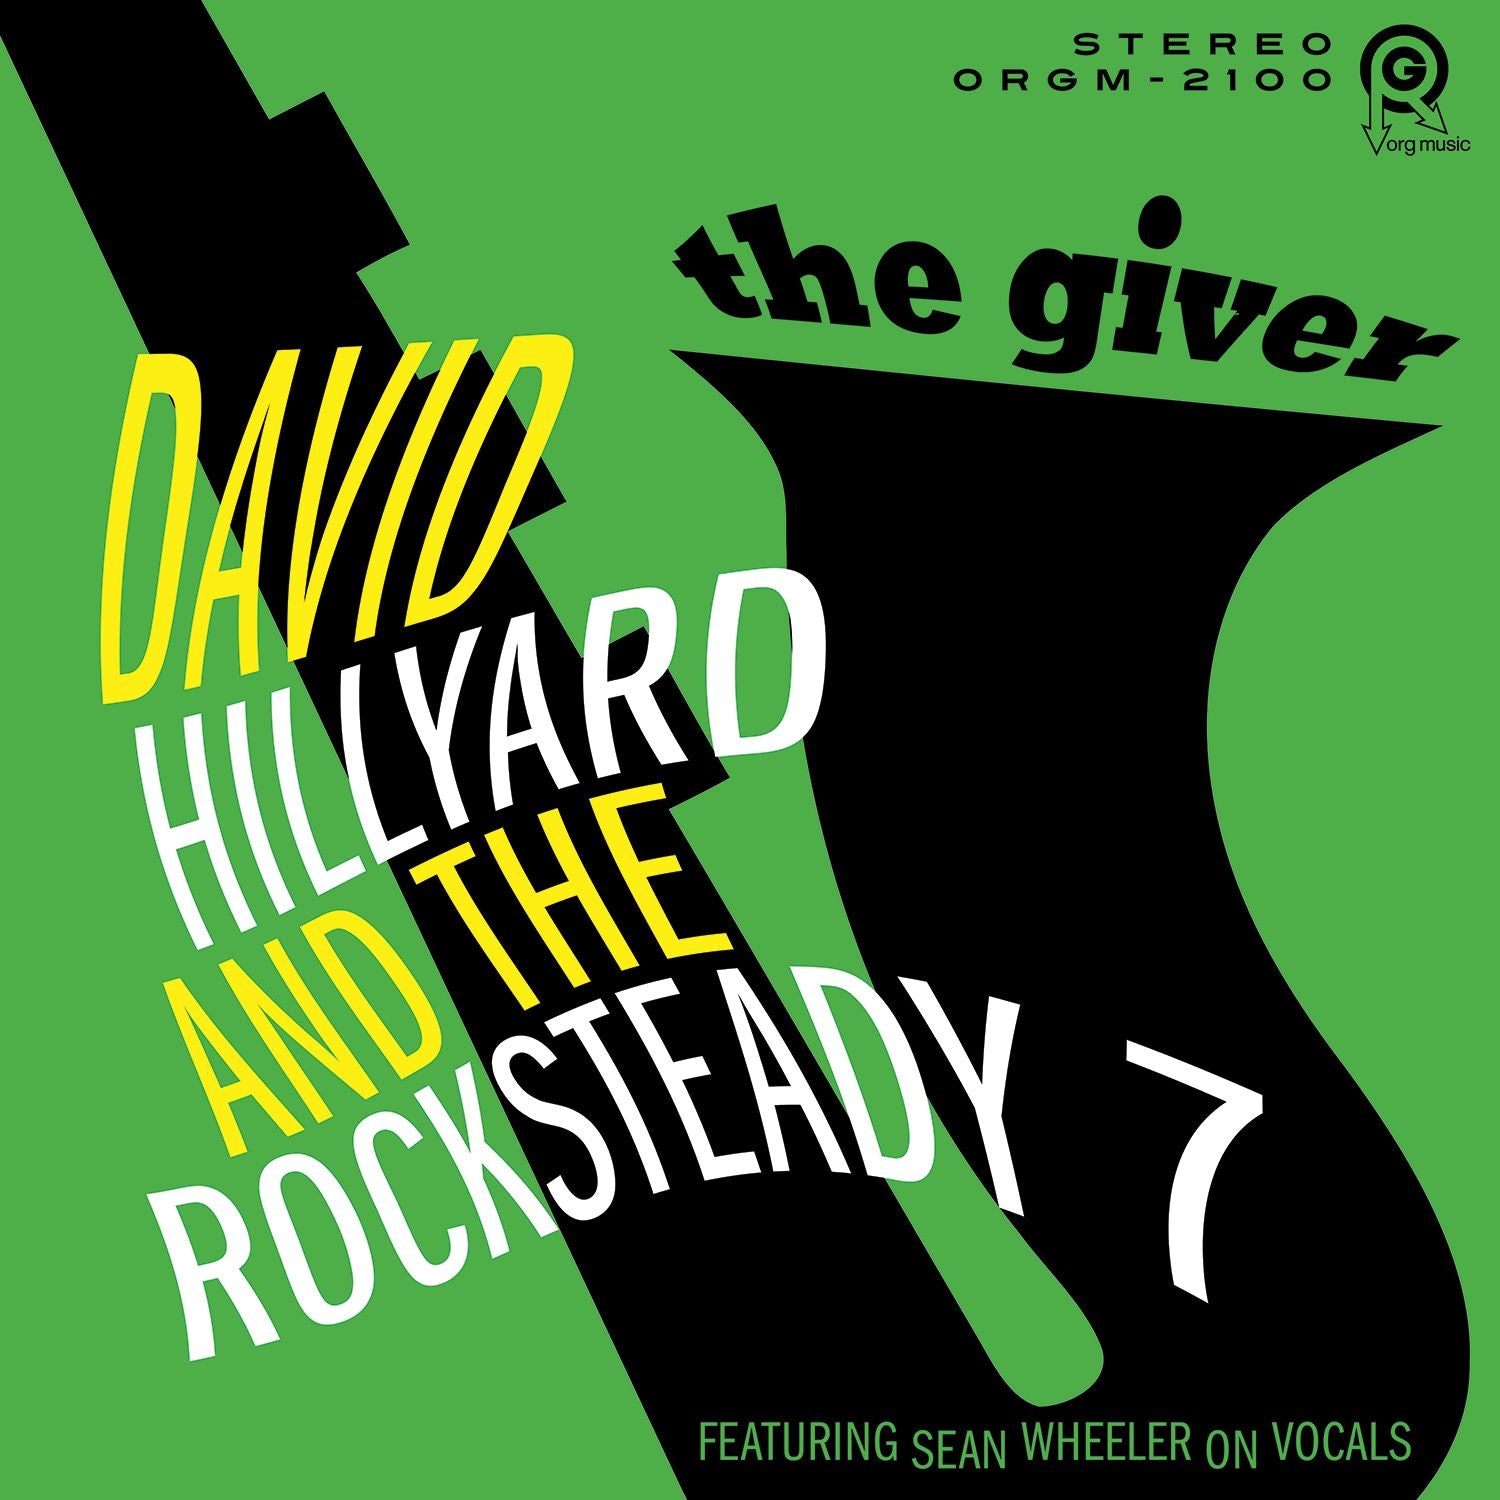 The Dave Hillyard Rocksteady 7 - The Giver